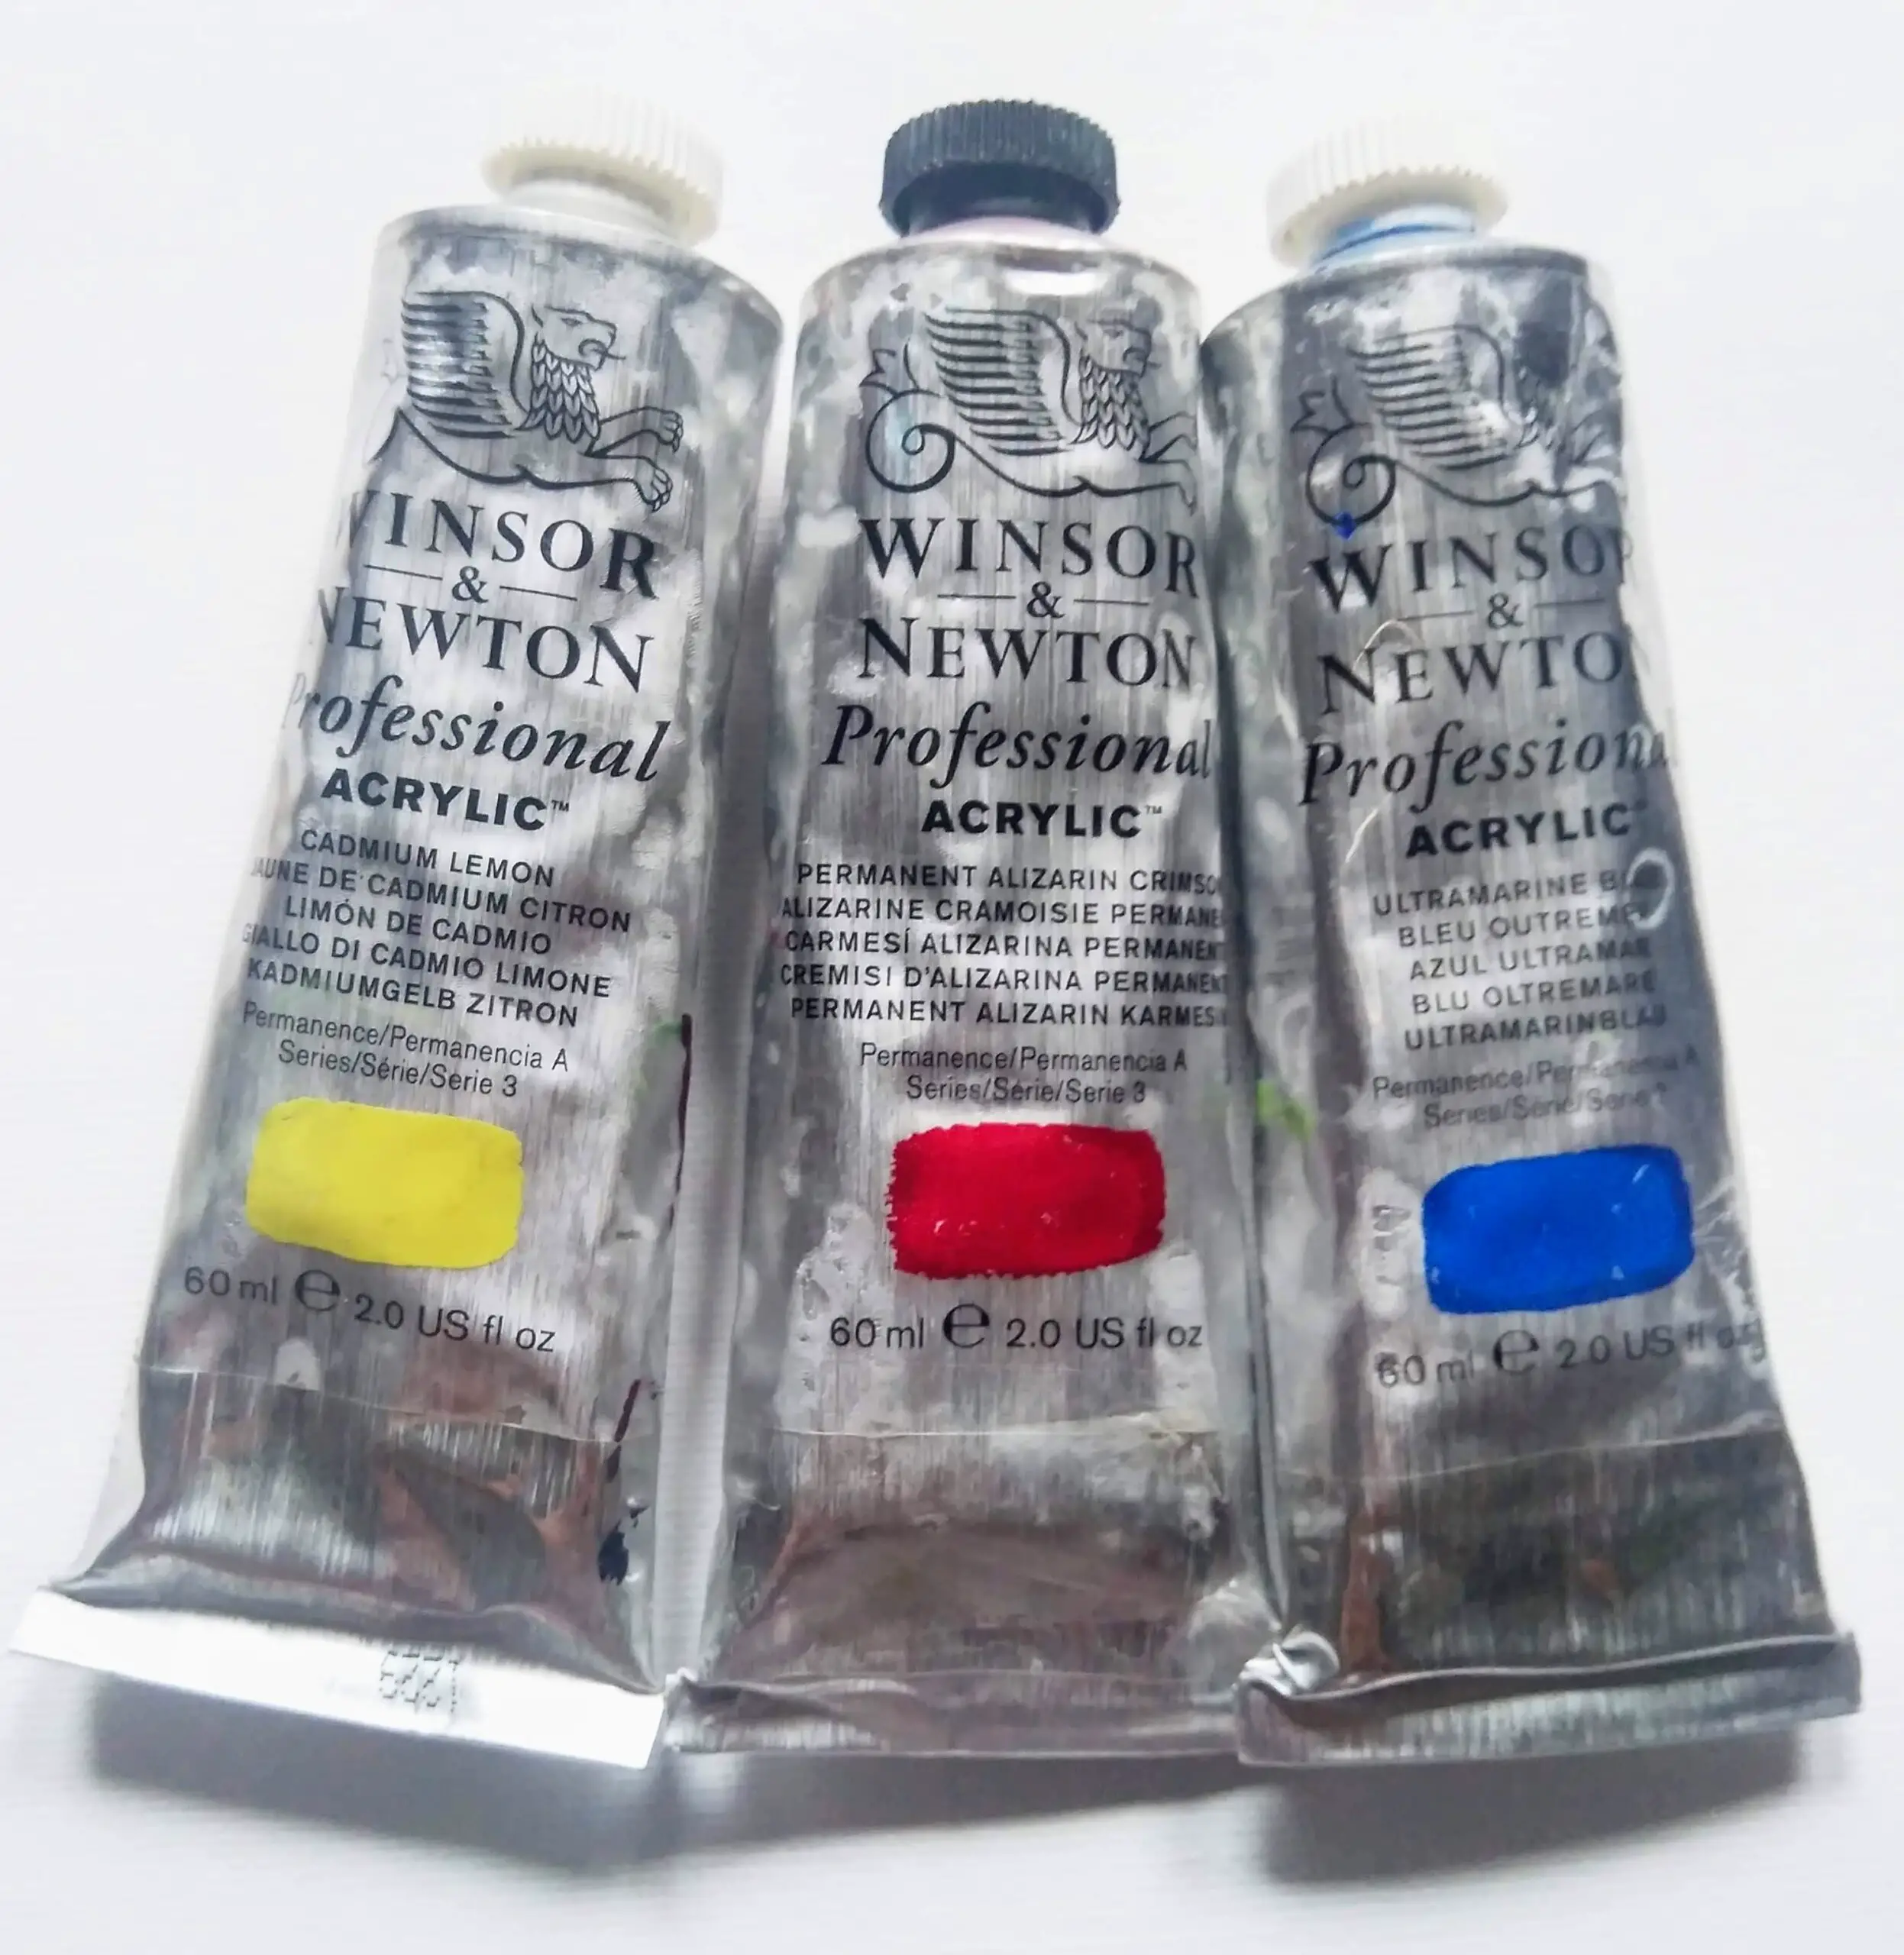 Are Winsor & Newton professional acrylic paint good?-Review